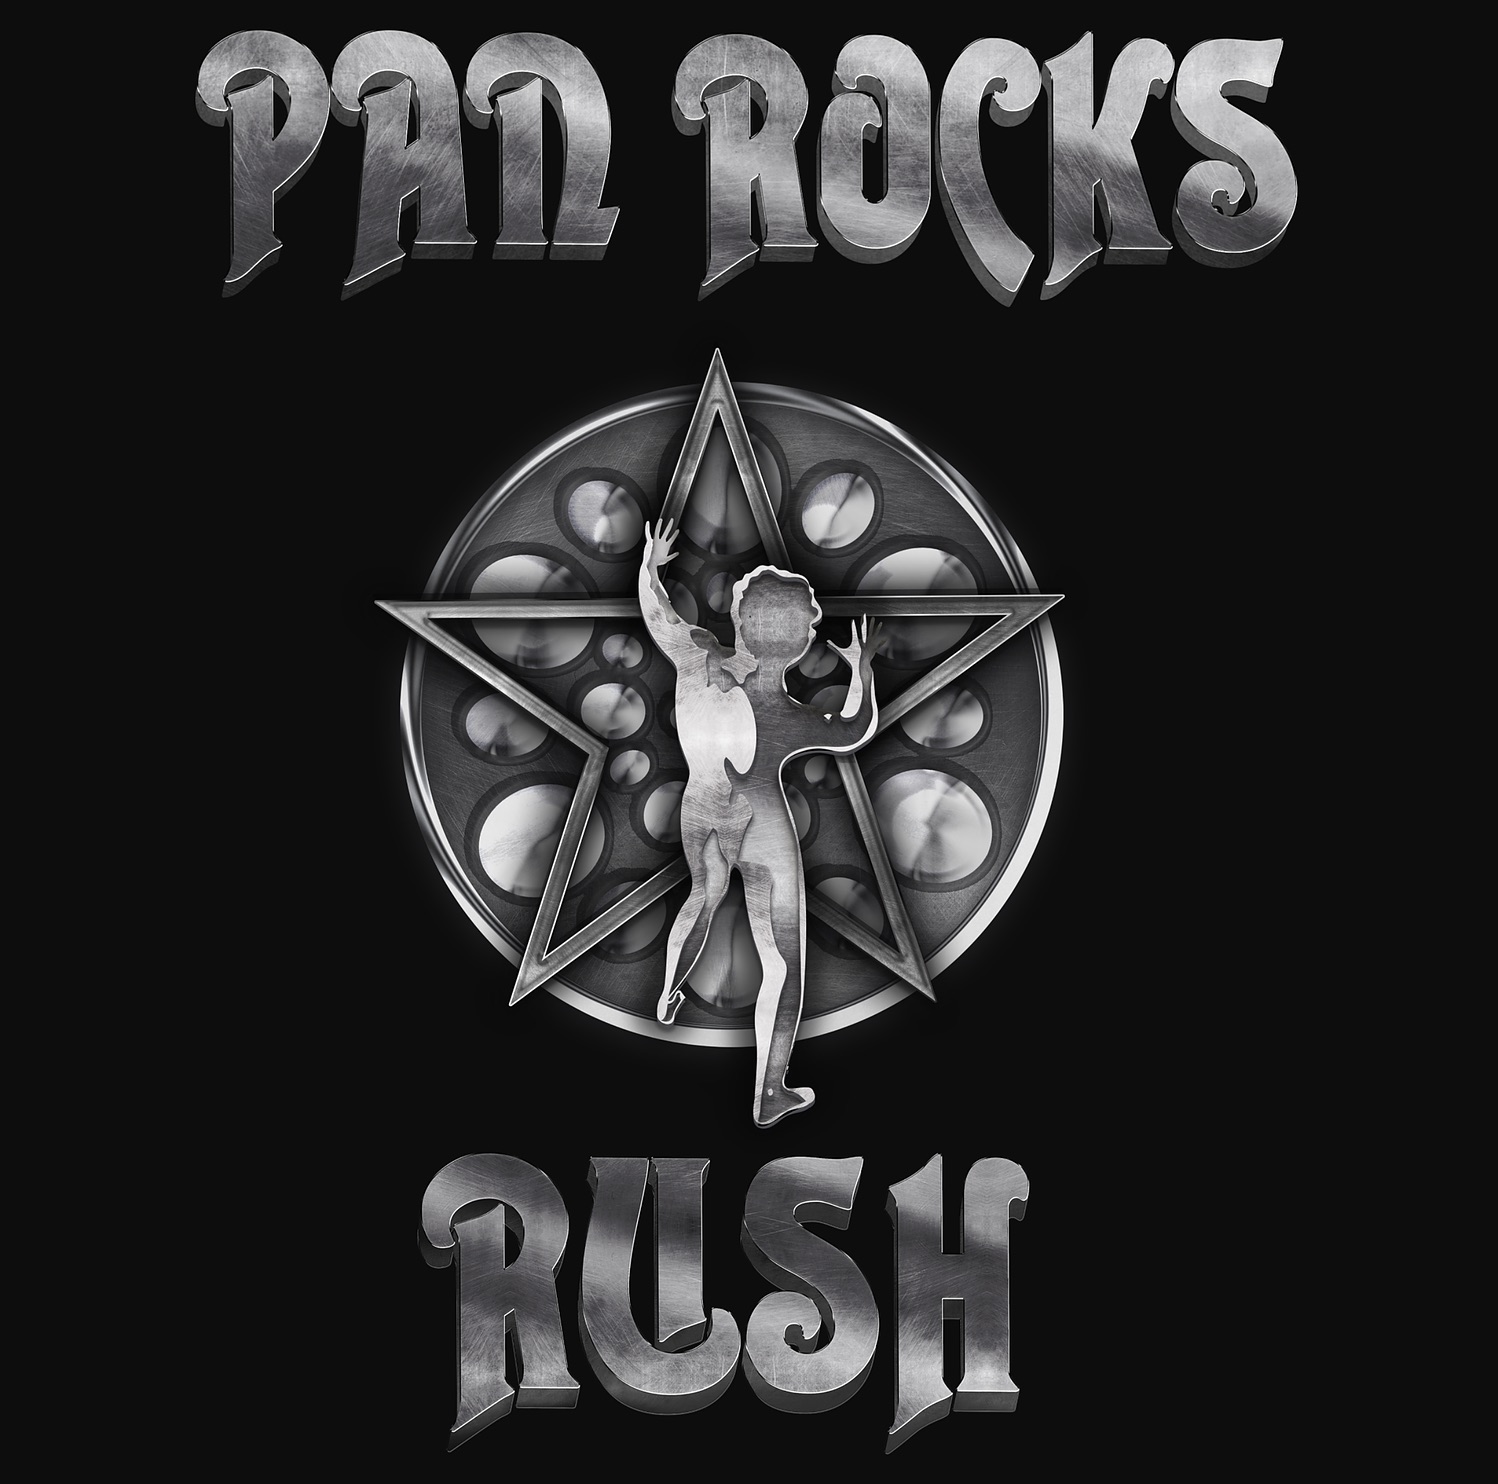 Rush Tribute Album Featuring Mike Portnoy Coming From Steel Drum Orchestra Pan Rocks